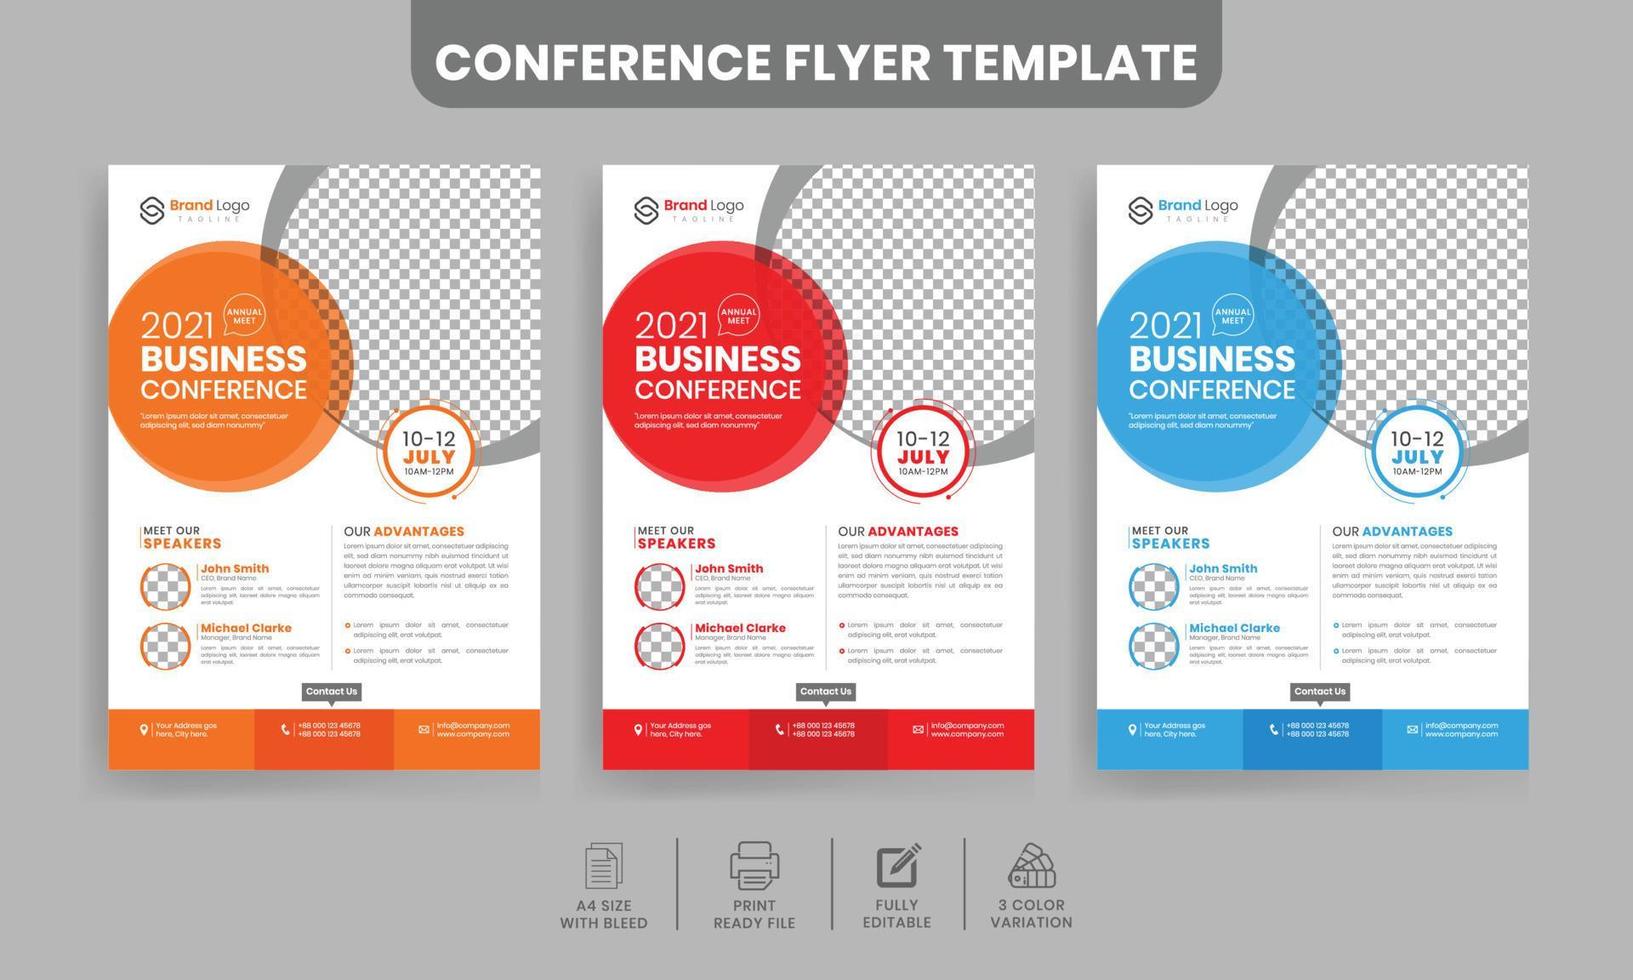 Corporate business flyer design with a4 size editable flyer template vector